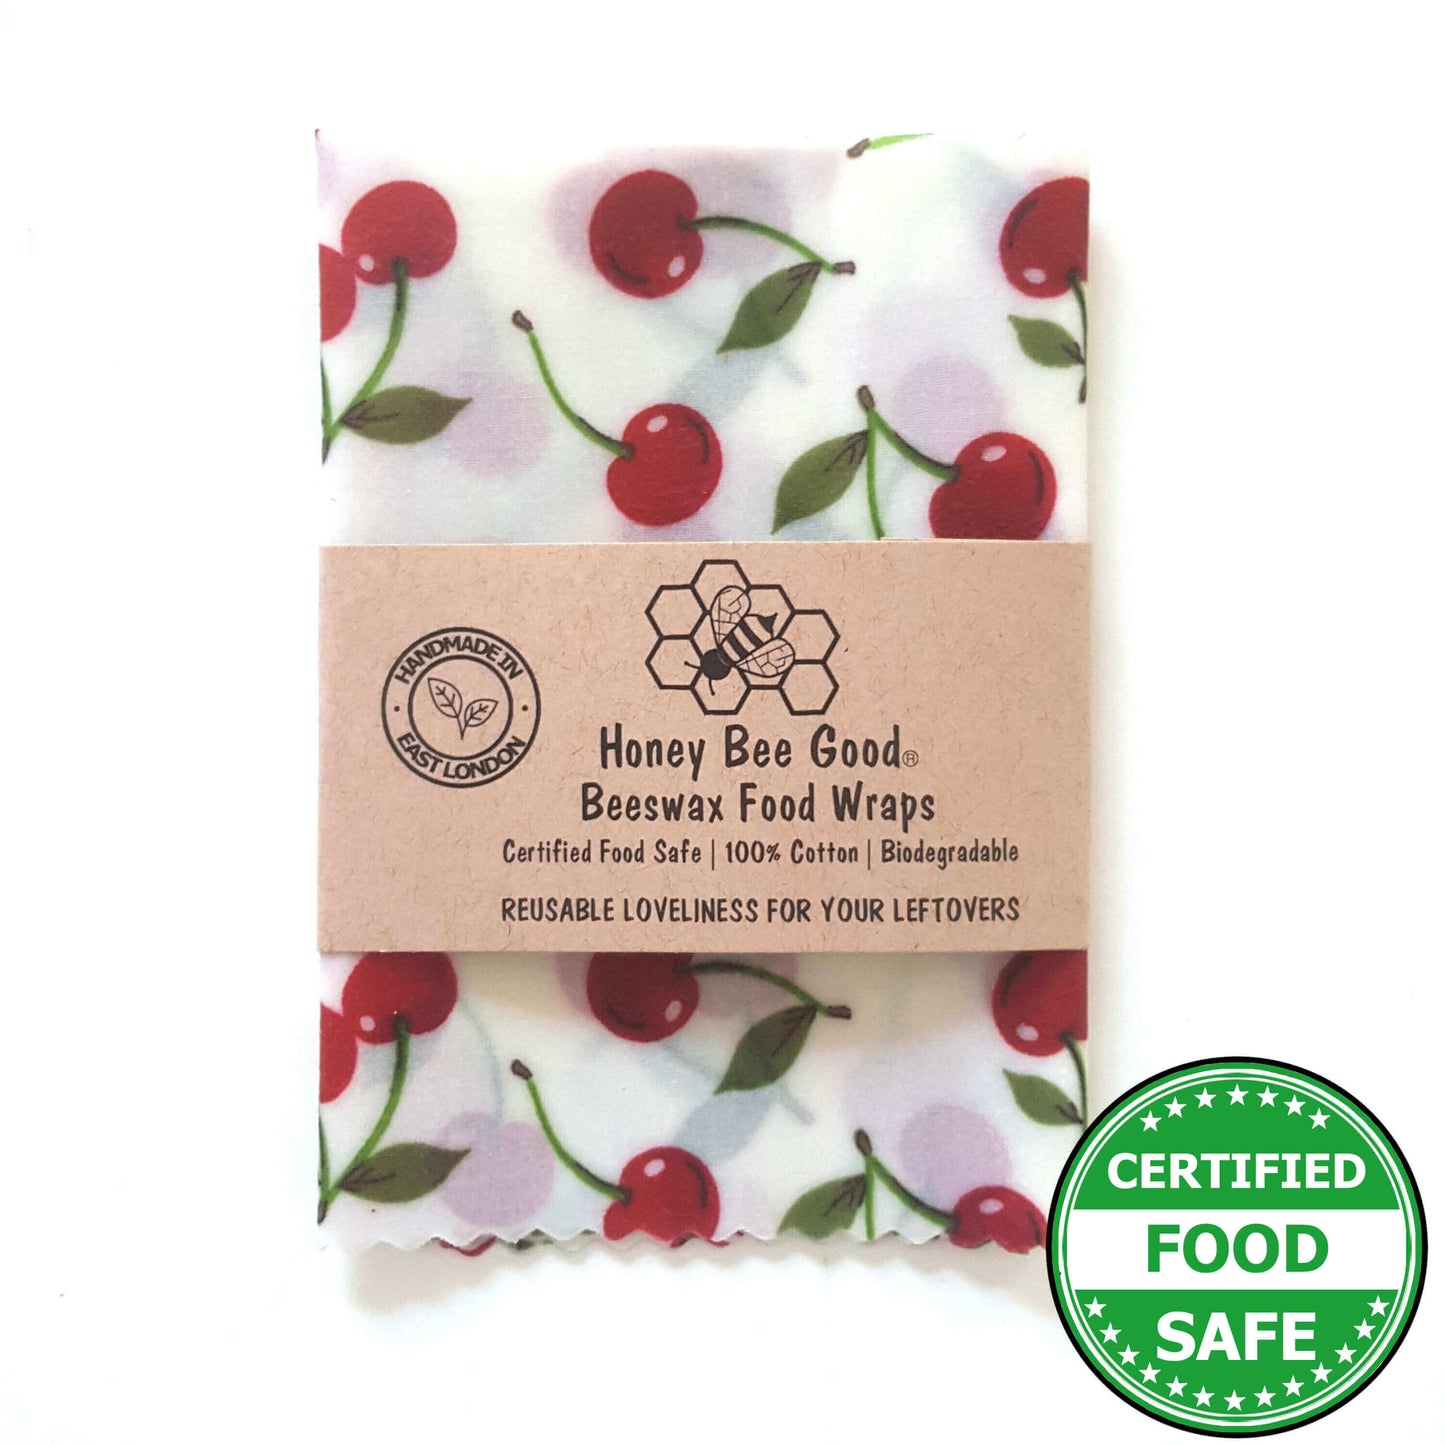 Reusable Beeswax Food Wraps 100% Hand Made in the UK by Honey Bee Good. Planet-Kind single large beeswax wrap in Cherries pattern